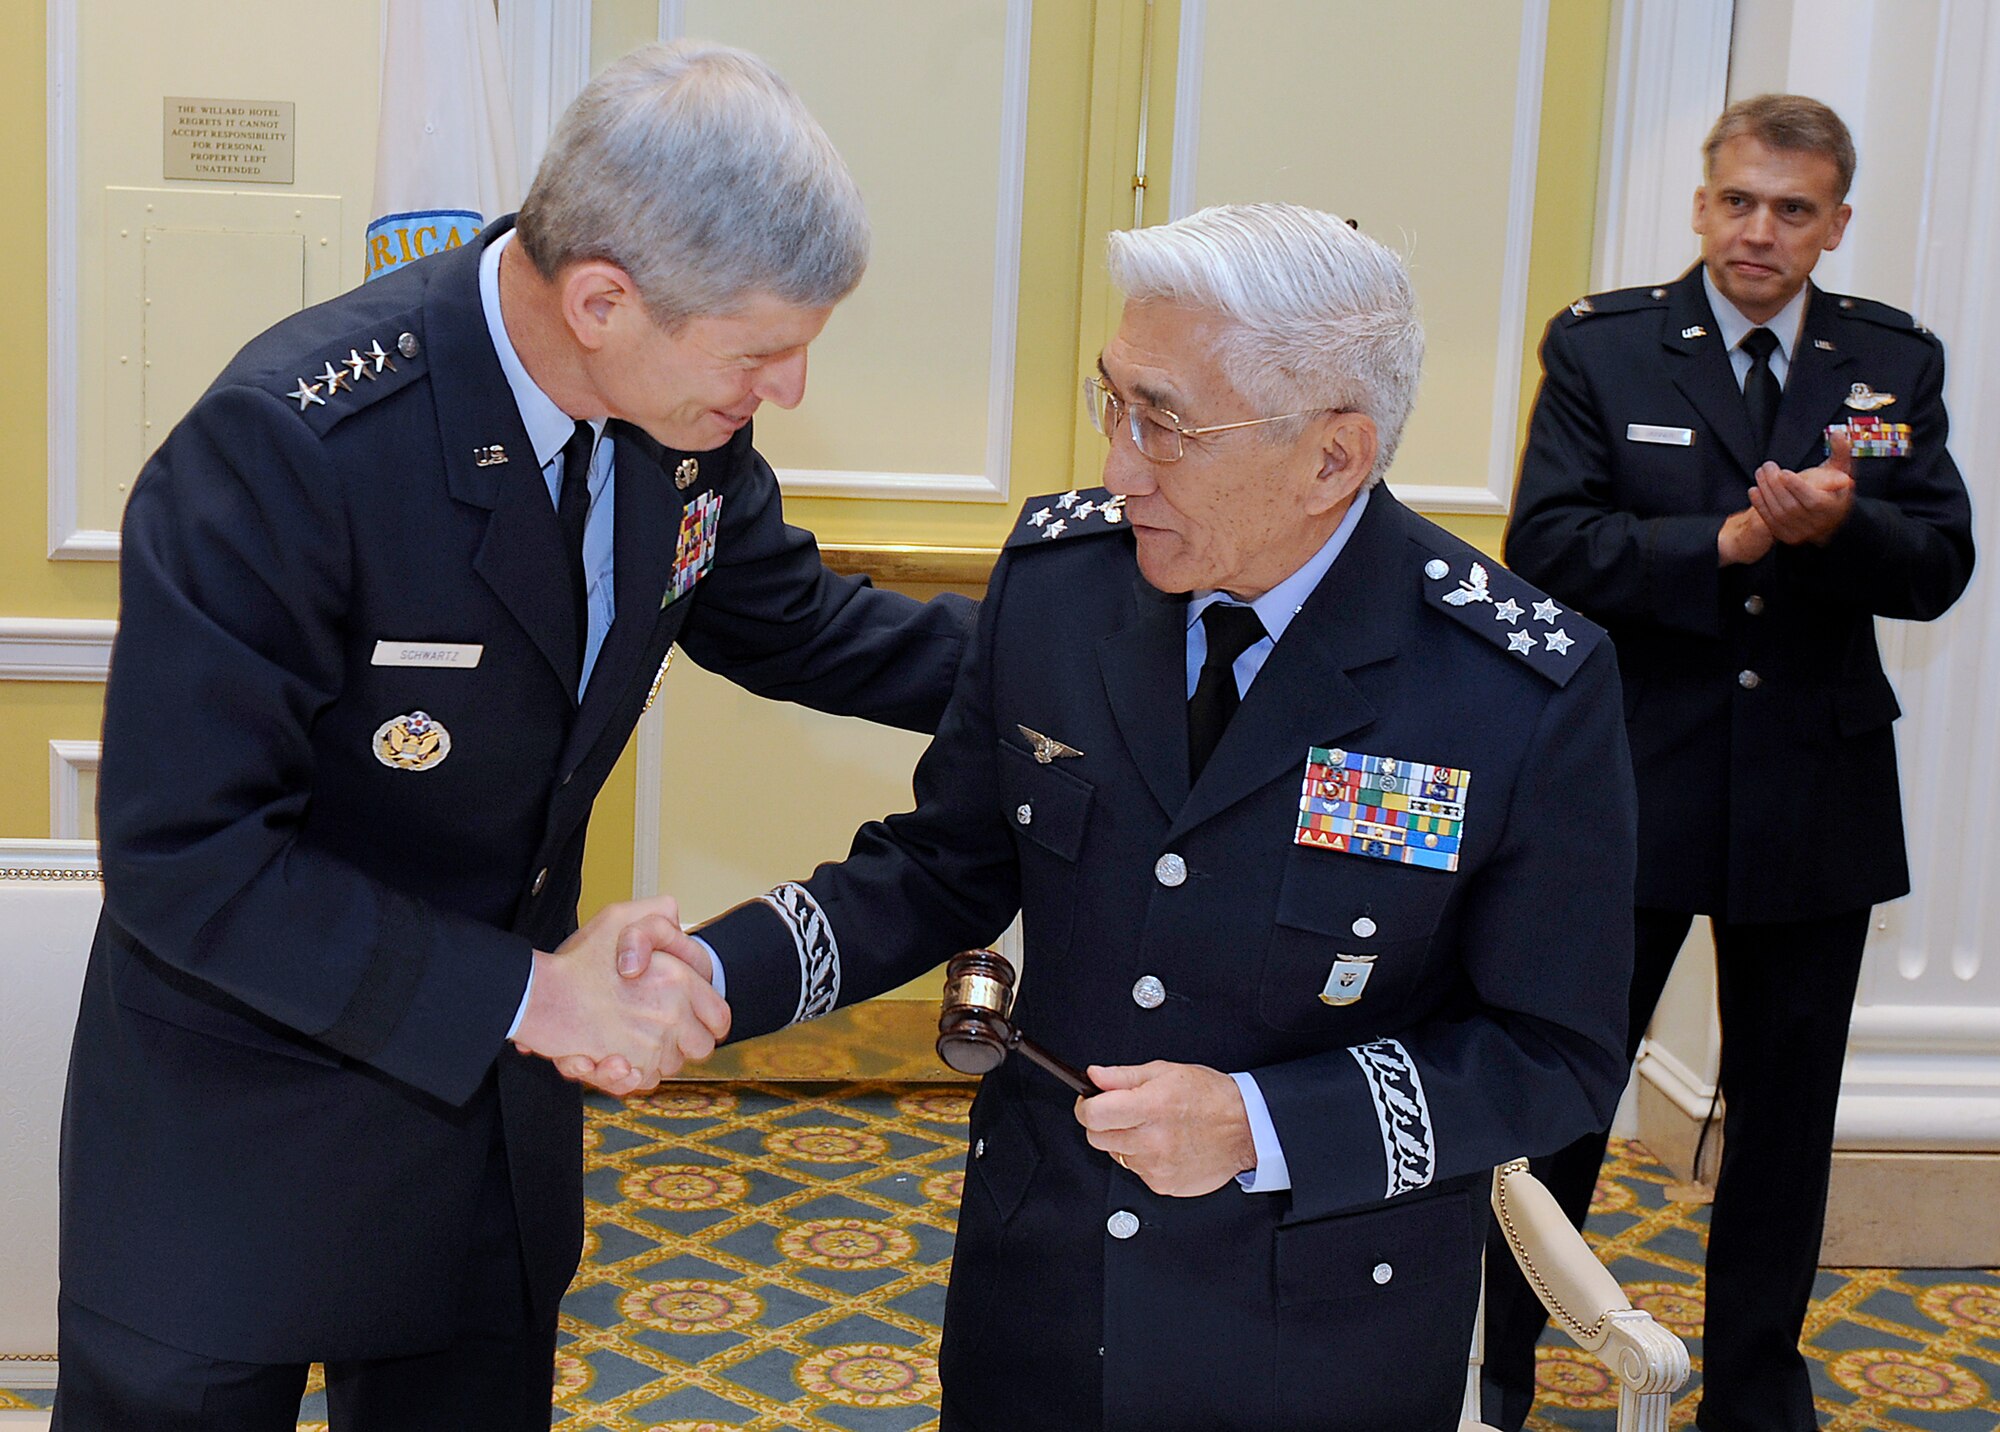 U.S. Air Force Chief of Staff Gen. Norton Schwartz passes a gavel and congratulates Air Lt. Gen. Juniti Saito, the aeronautical commander of the Brazilian air force, during "Conference of Chiefs of American Air Forces" (CONJEFAMER) June 16,2010, in Washington, D.C. The passing of this gavel to General Saito demonstrates that he will be the president and host of CONJEFAMER 2011 in Brazil. (U.S. Air Force photo/Scott M. Ash)